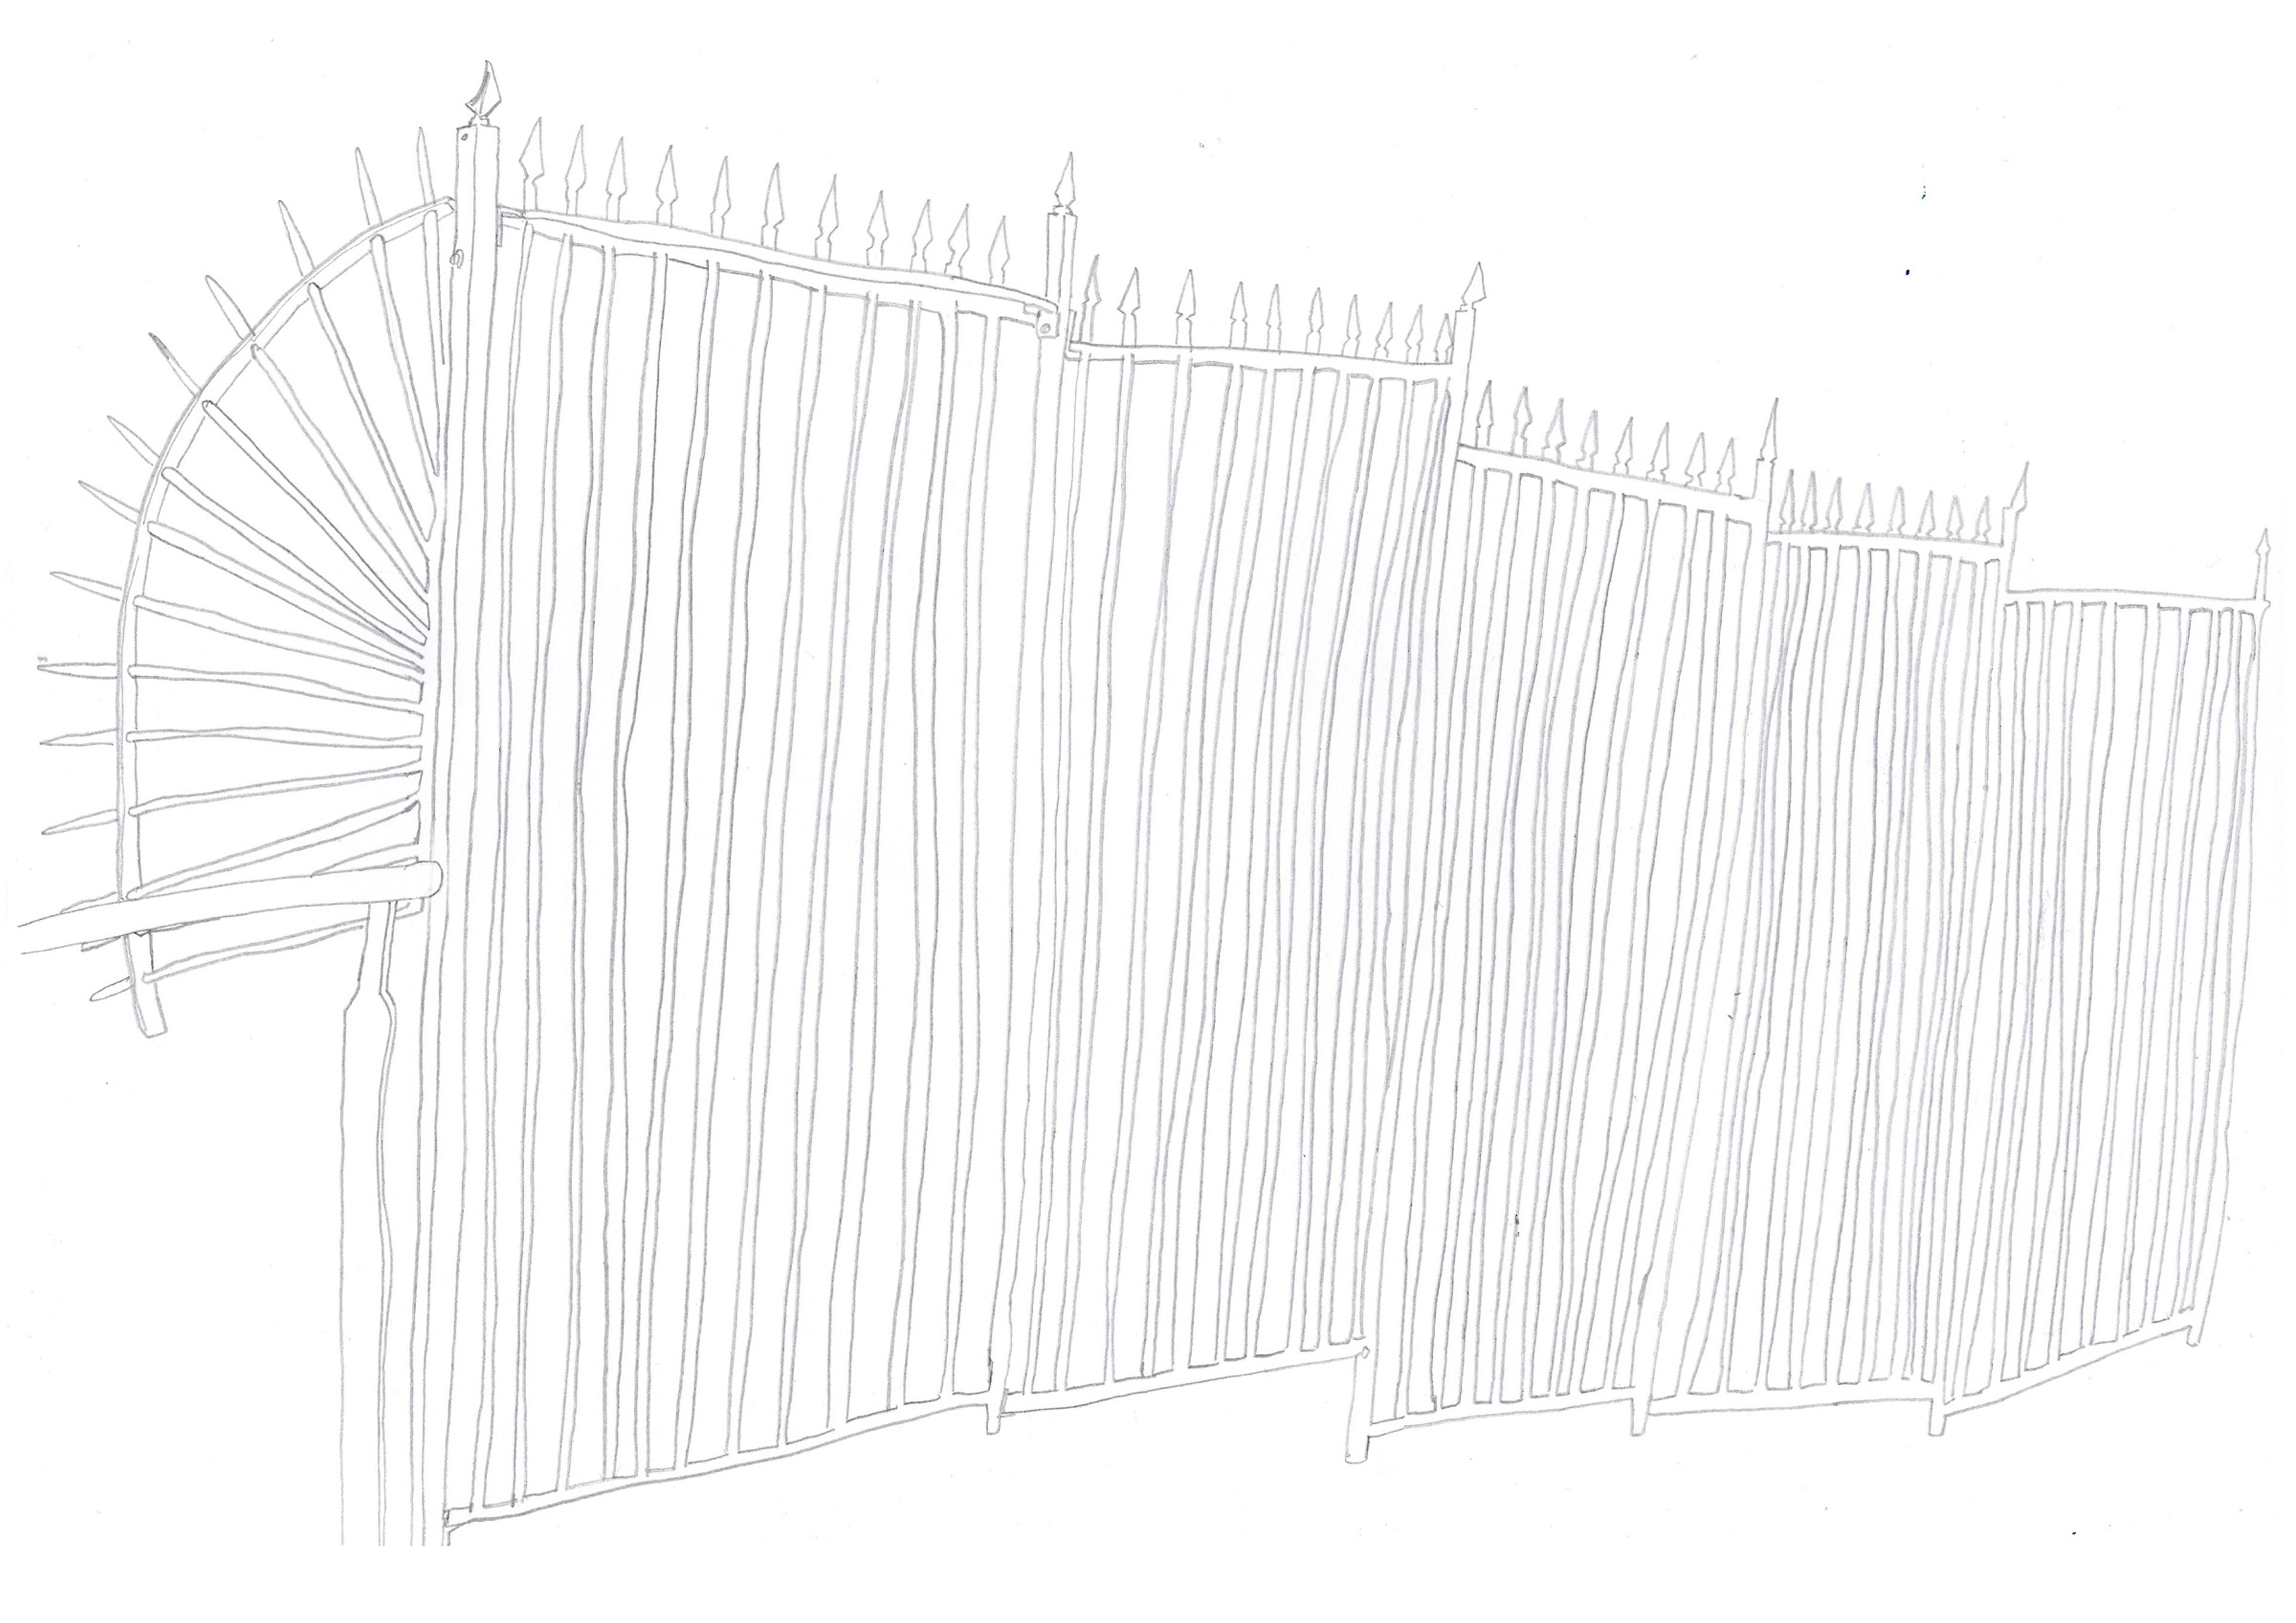 Pencil drawing of railings with spikes at the top